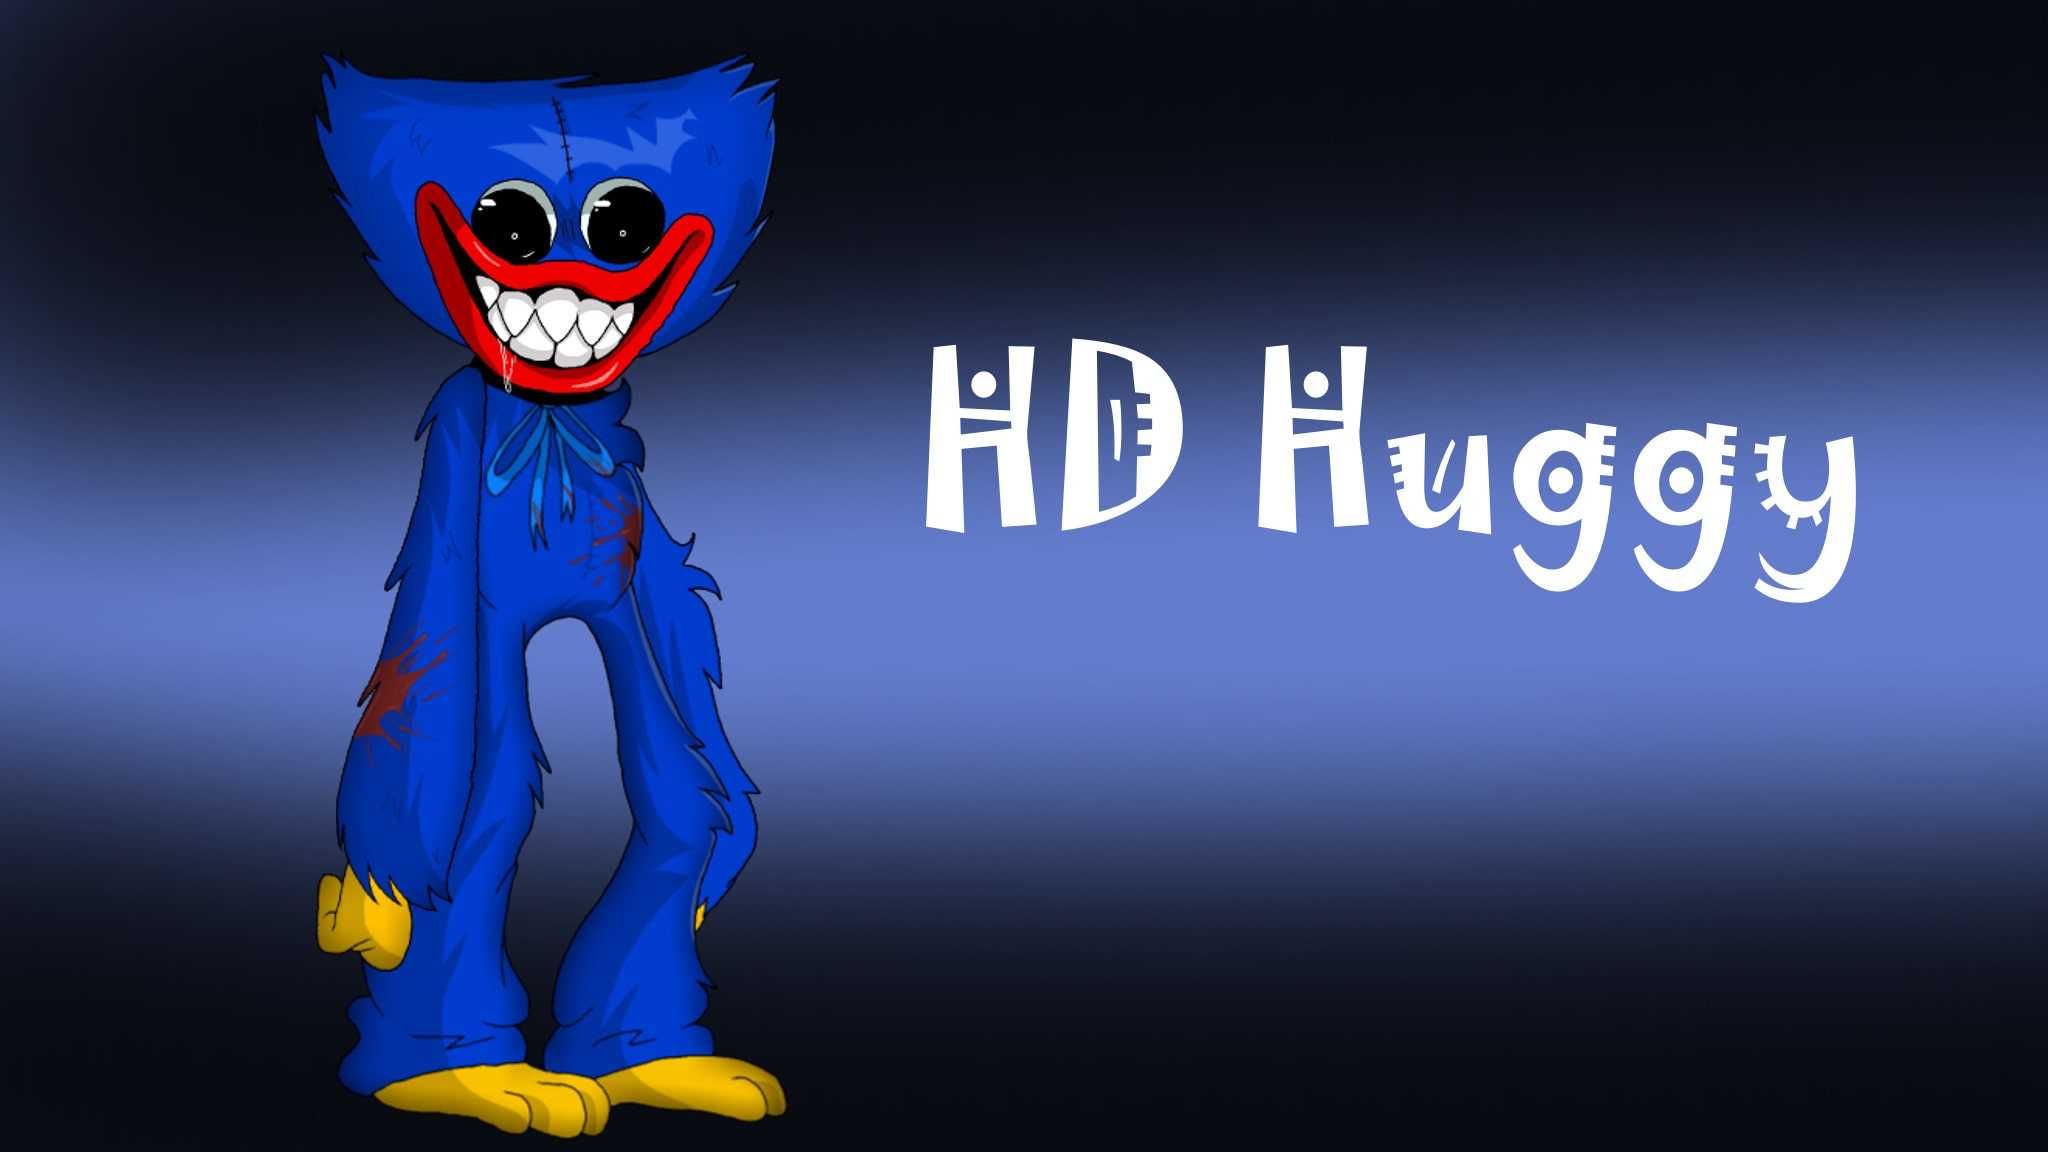 Huggy Wuggy Wallpaper Free Huggy Wuggy Background